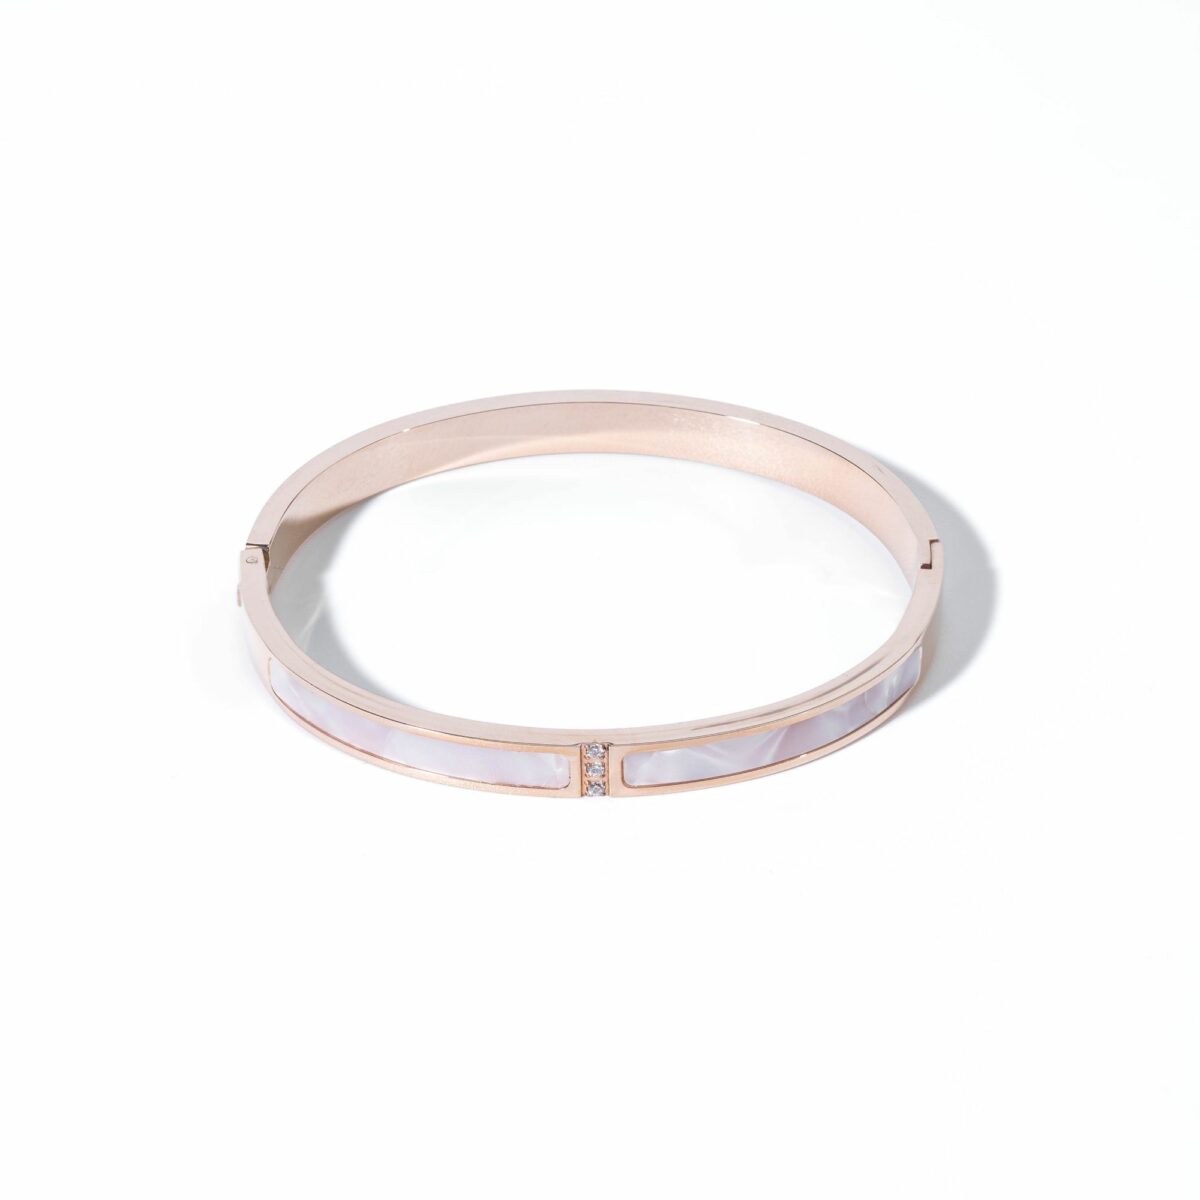 https://m.clubbella.co/product/18k-rose-gold-mother-of-pearl-bangle/ DSC00264-Edit-2